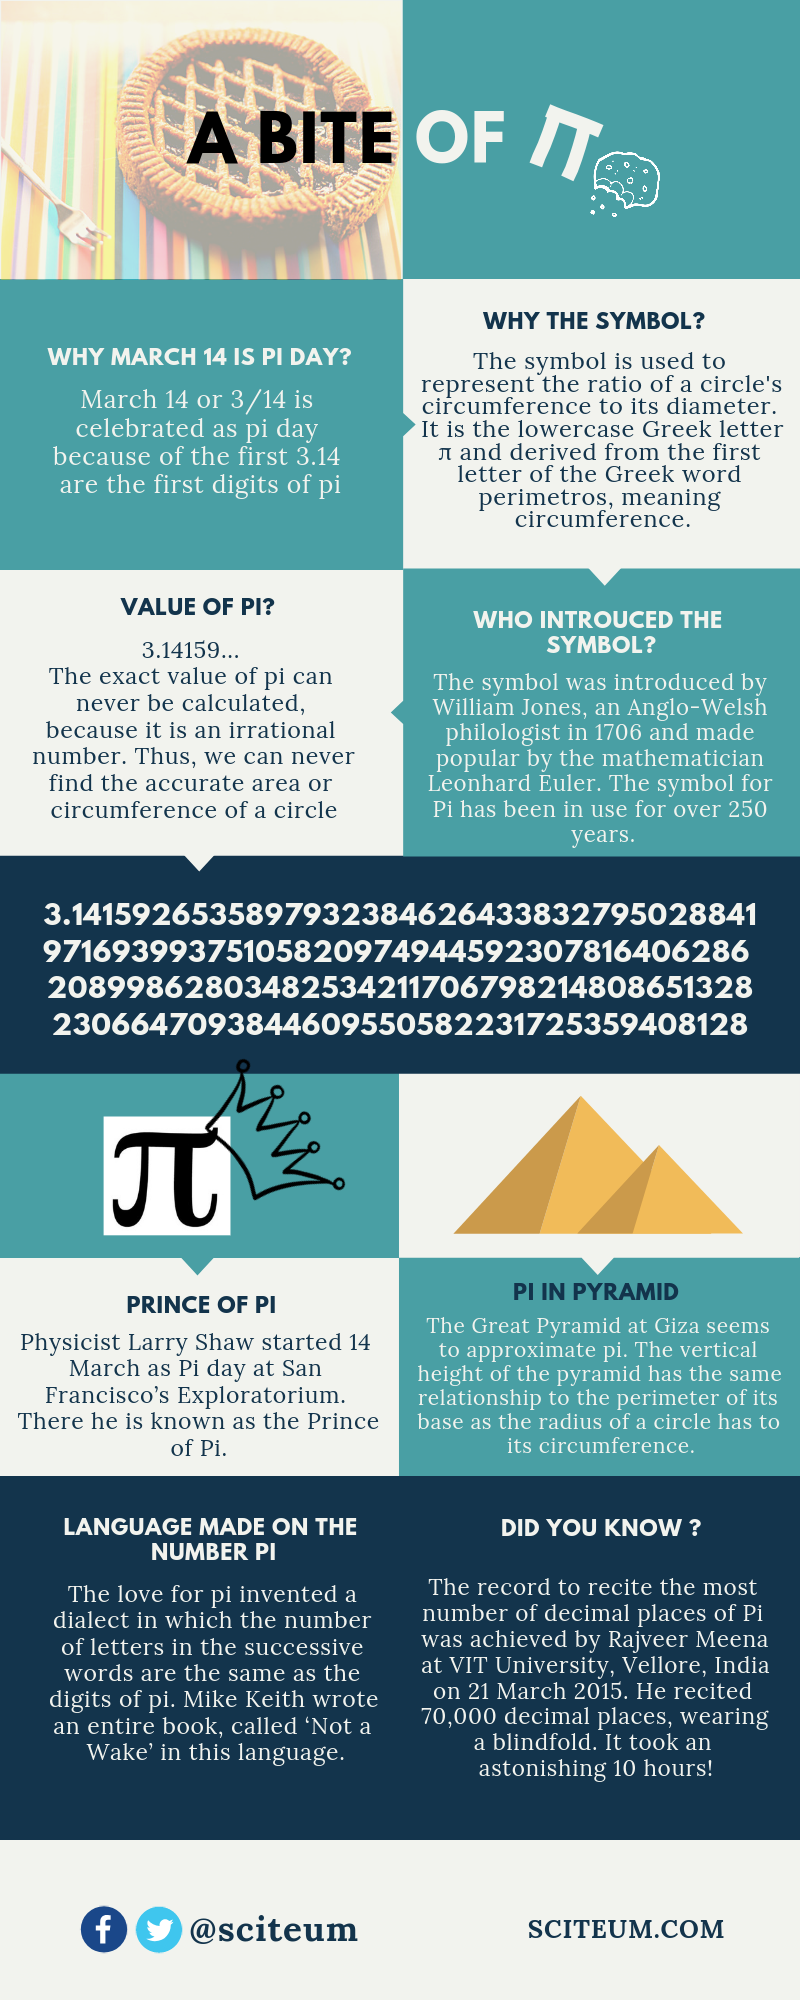 info-graphics showing some interesting facts about pi